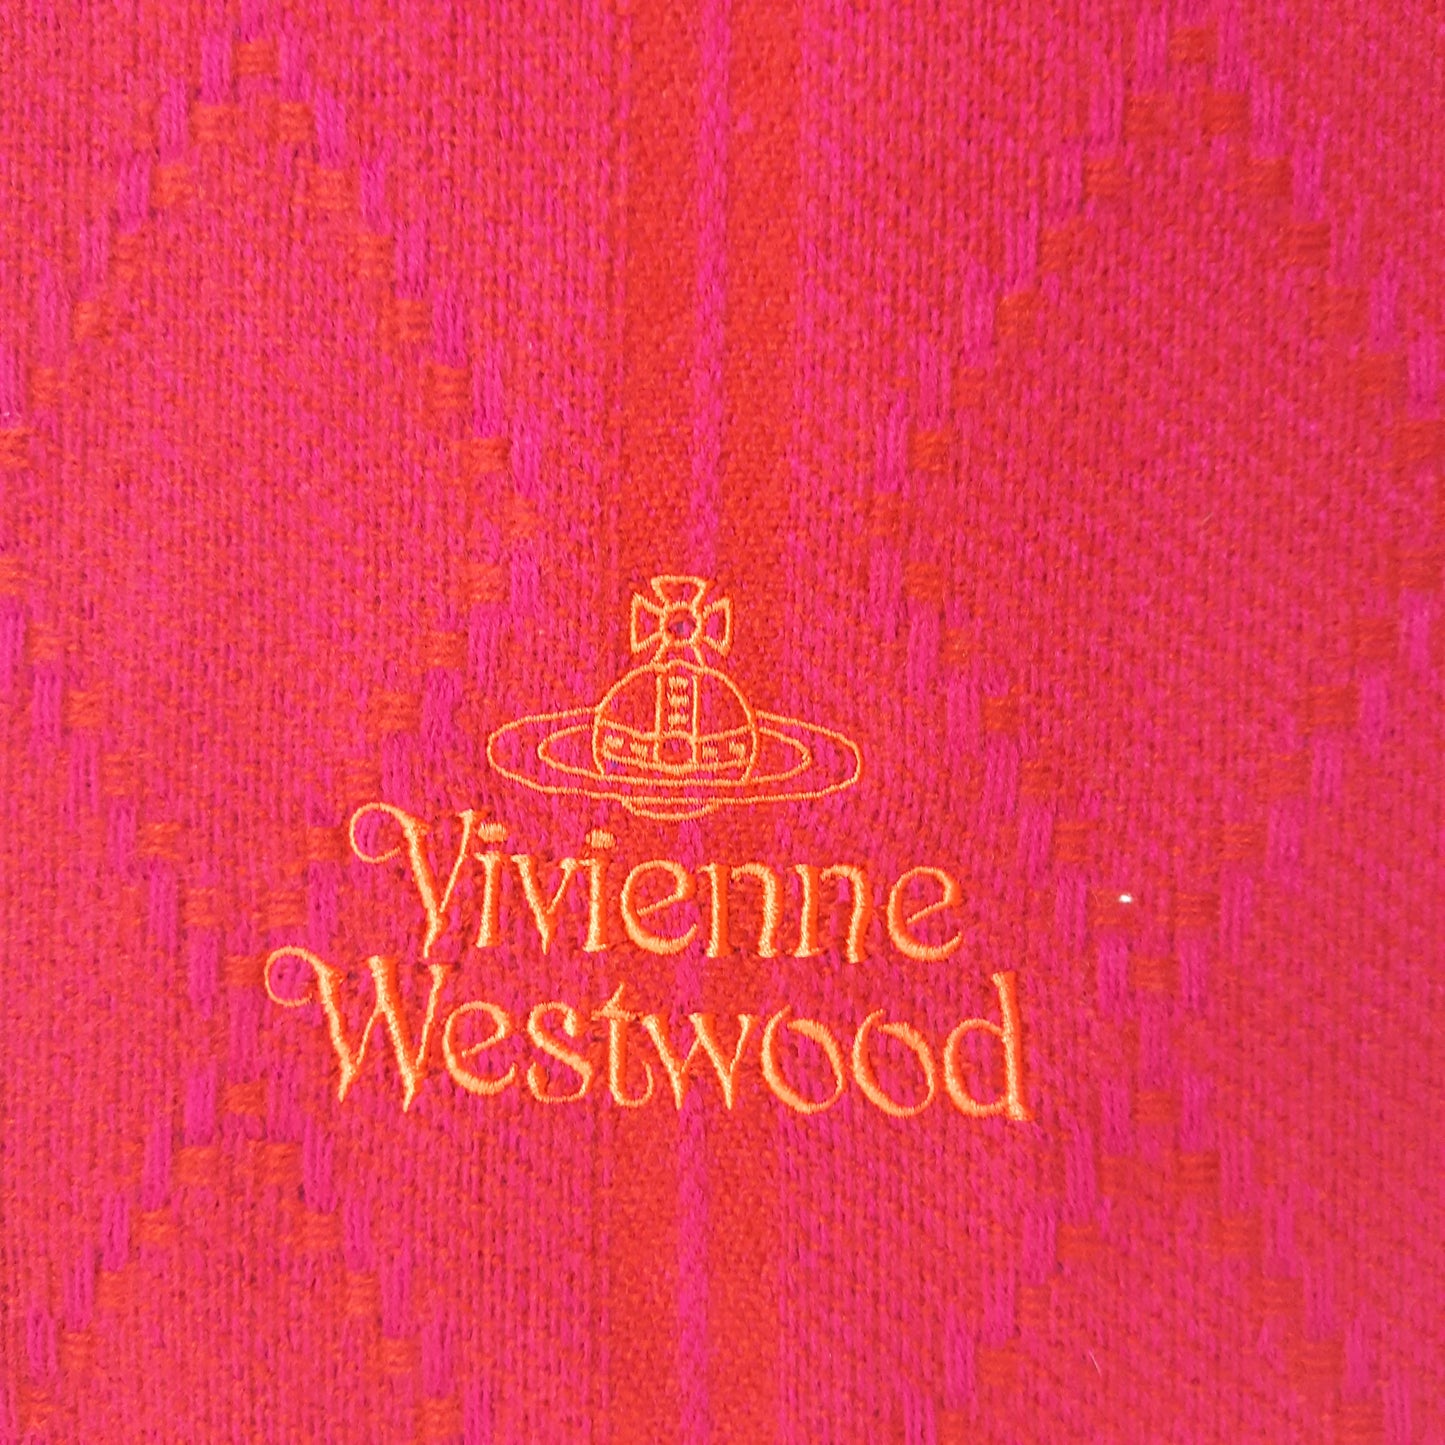 Vivienne Westwood Pink and Red Lambswool Scarf